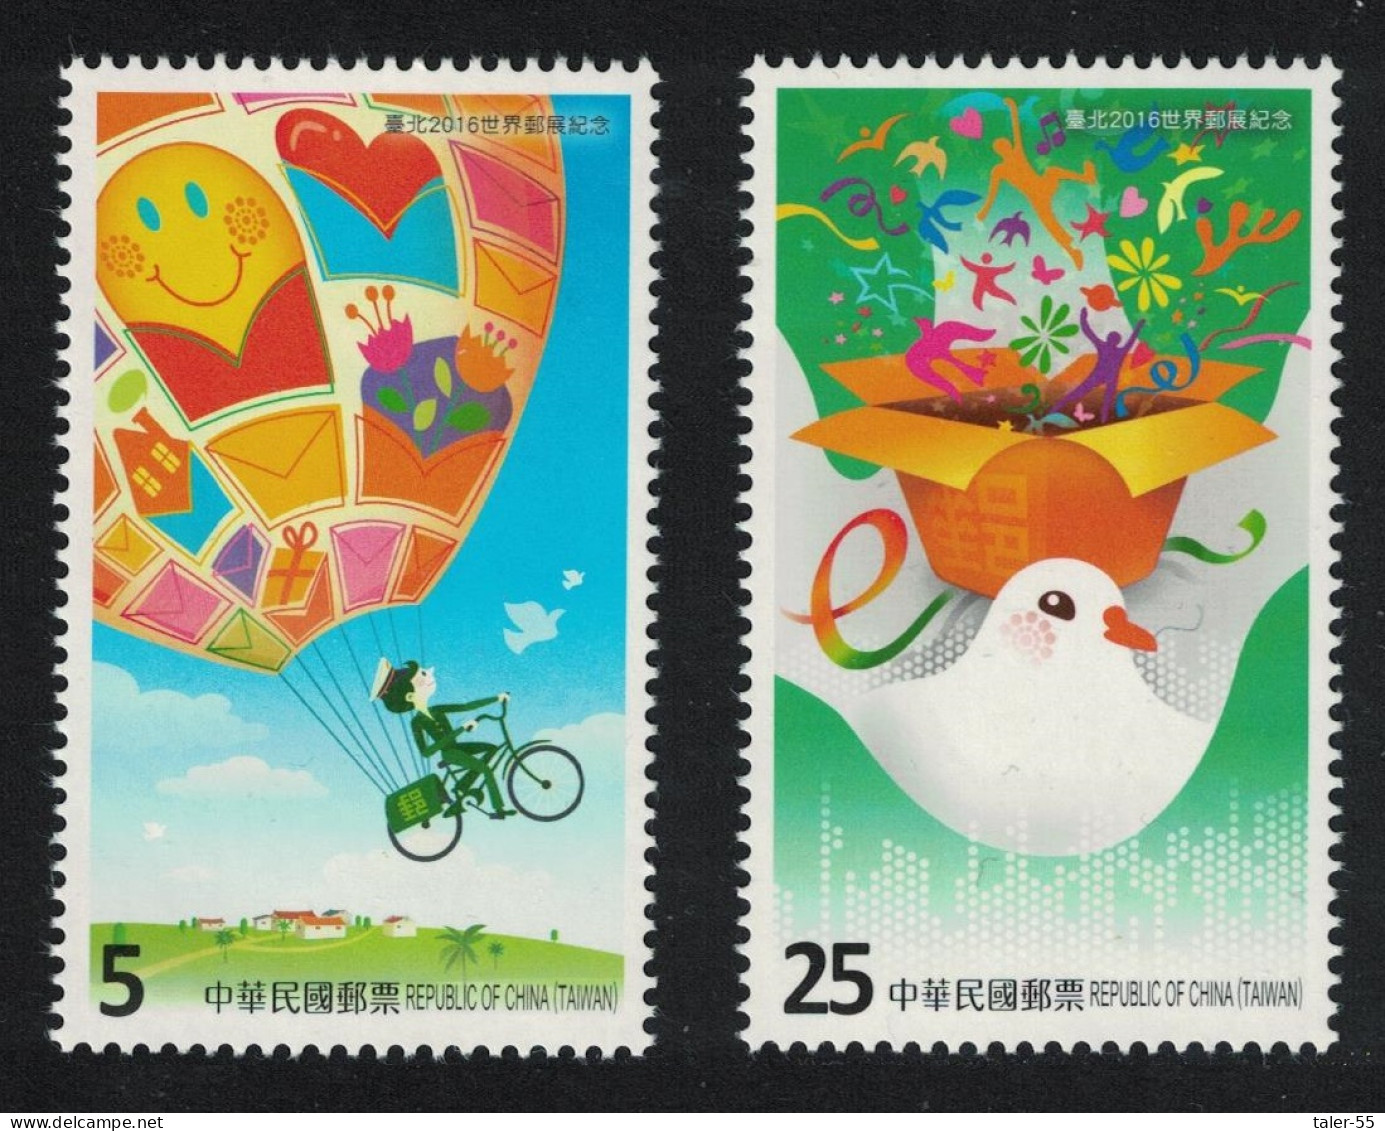 Taiwan Carrier Pigeon Air Balloon 2v 2016 MNH SG#4007-4008 - Unused Stamps